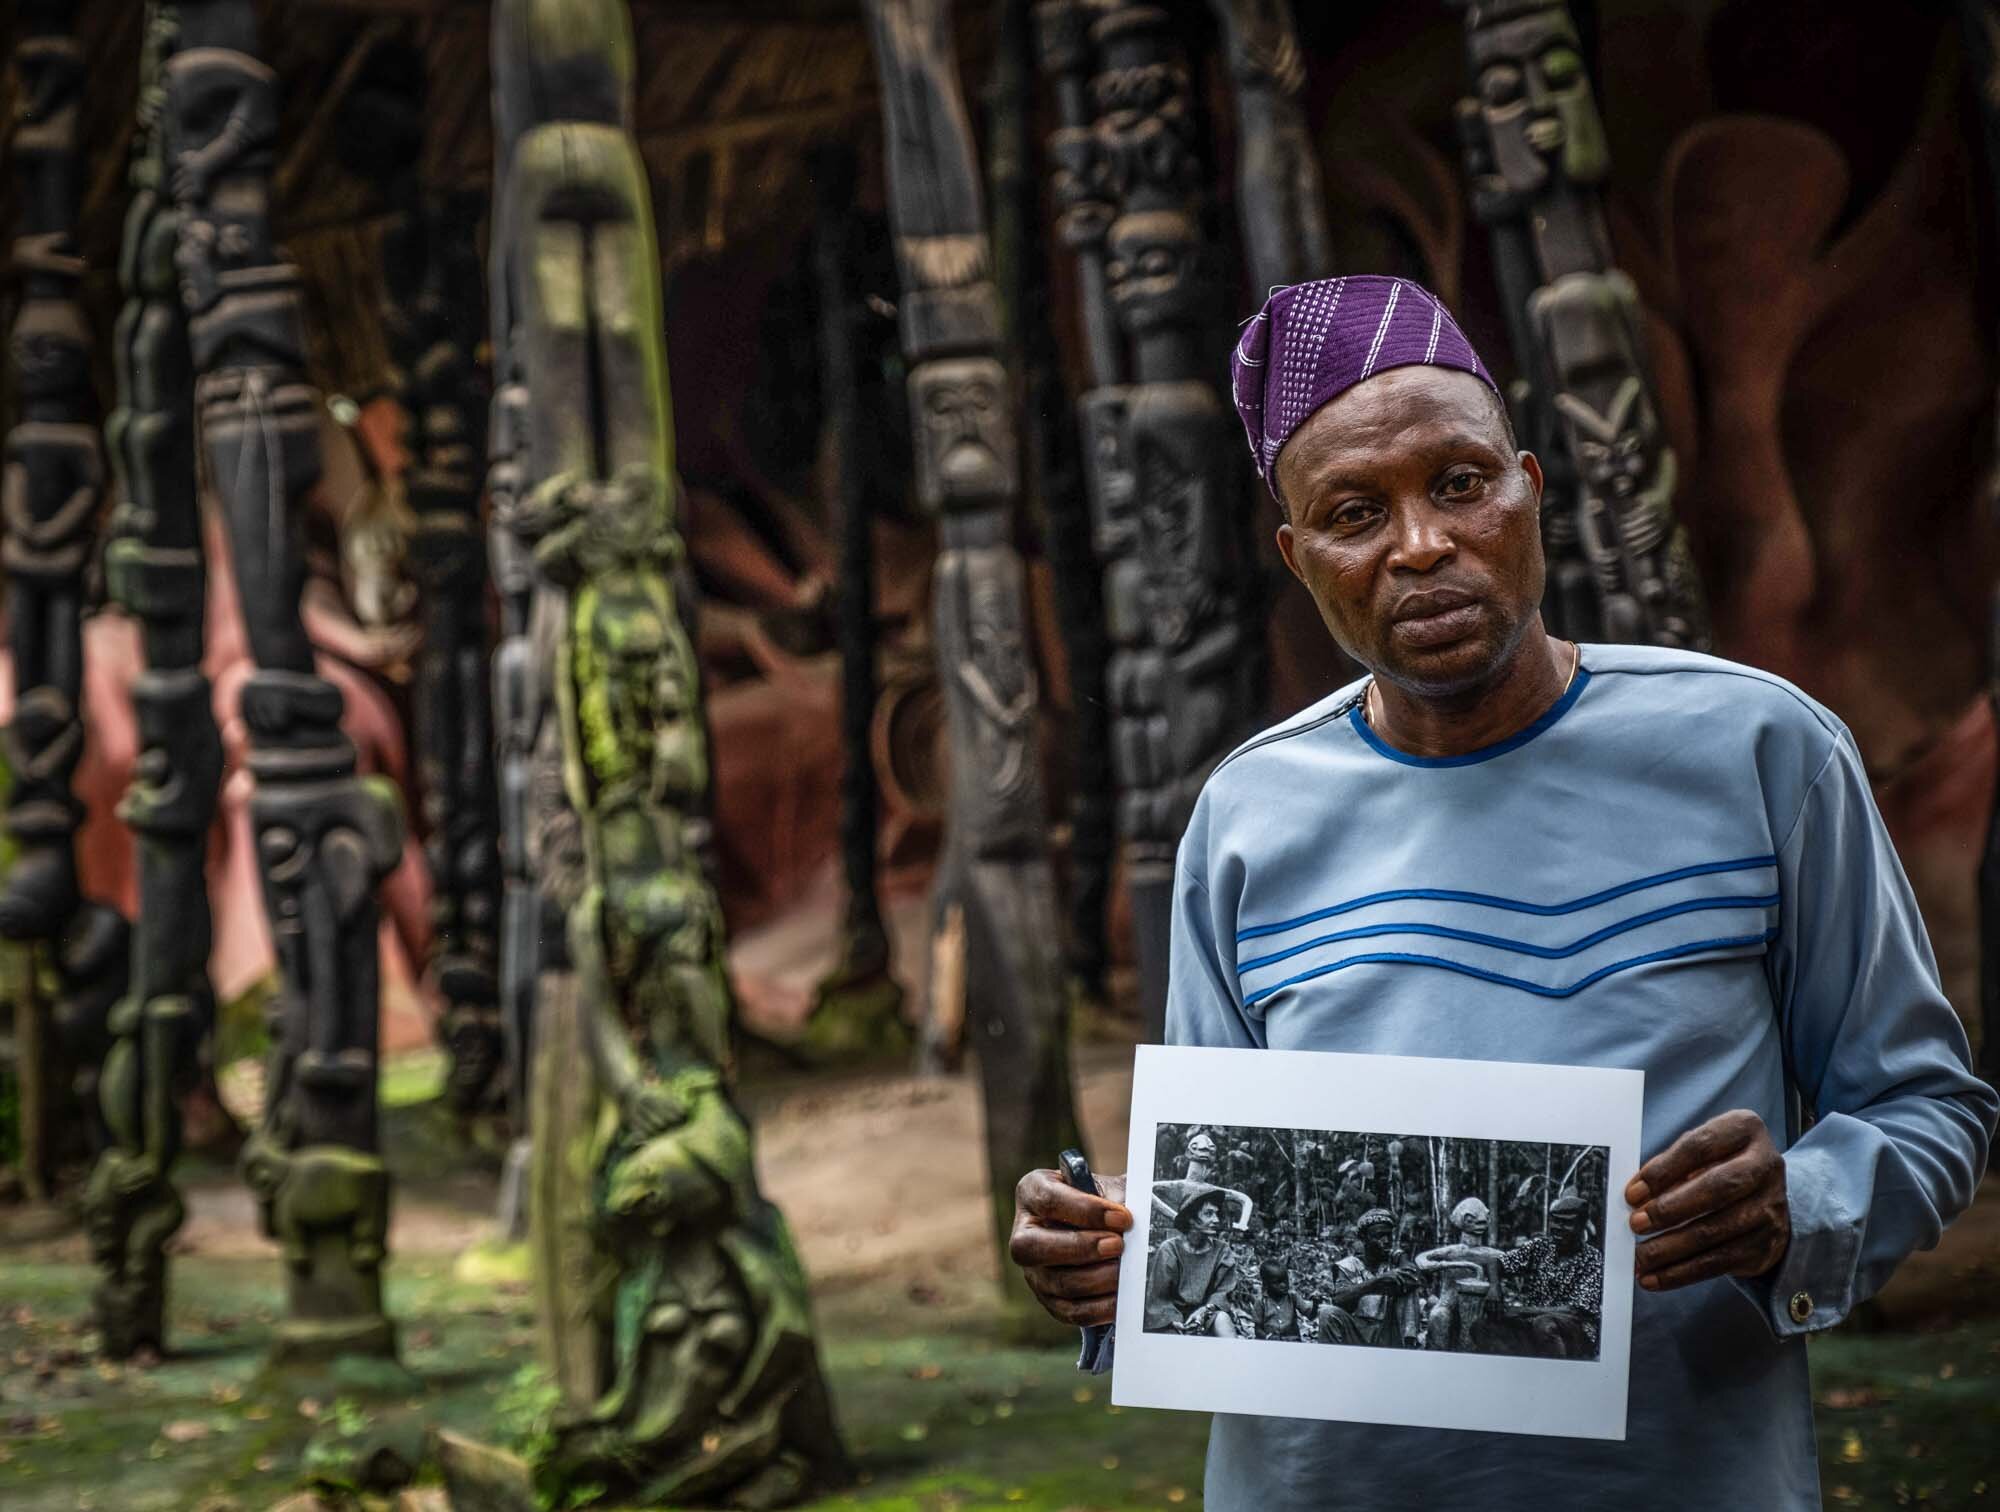  Local artist and conservator Nuredeen Akanji with a photo showing Susanne Wenger, himself as a child and his father Adebisi Akanji 